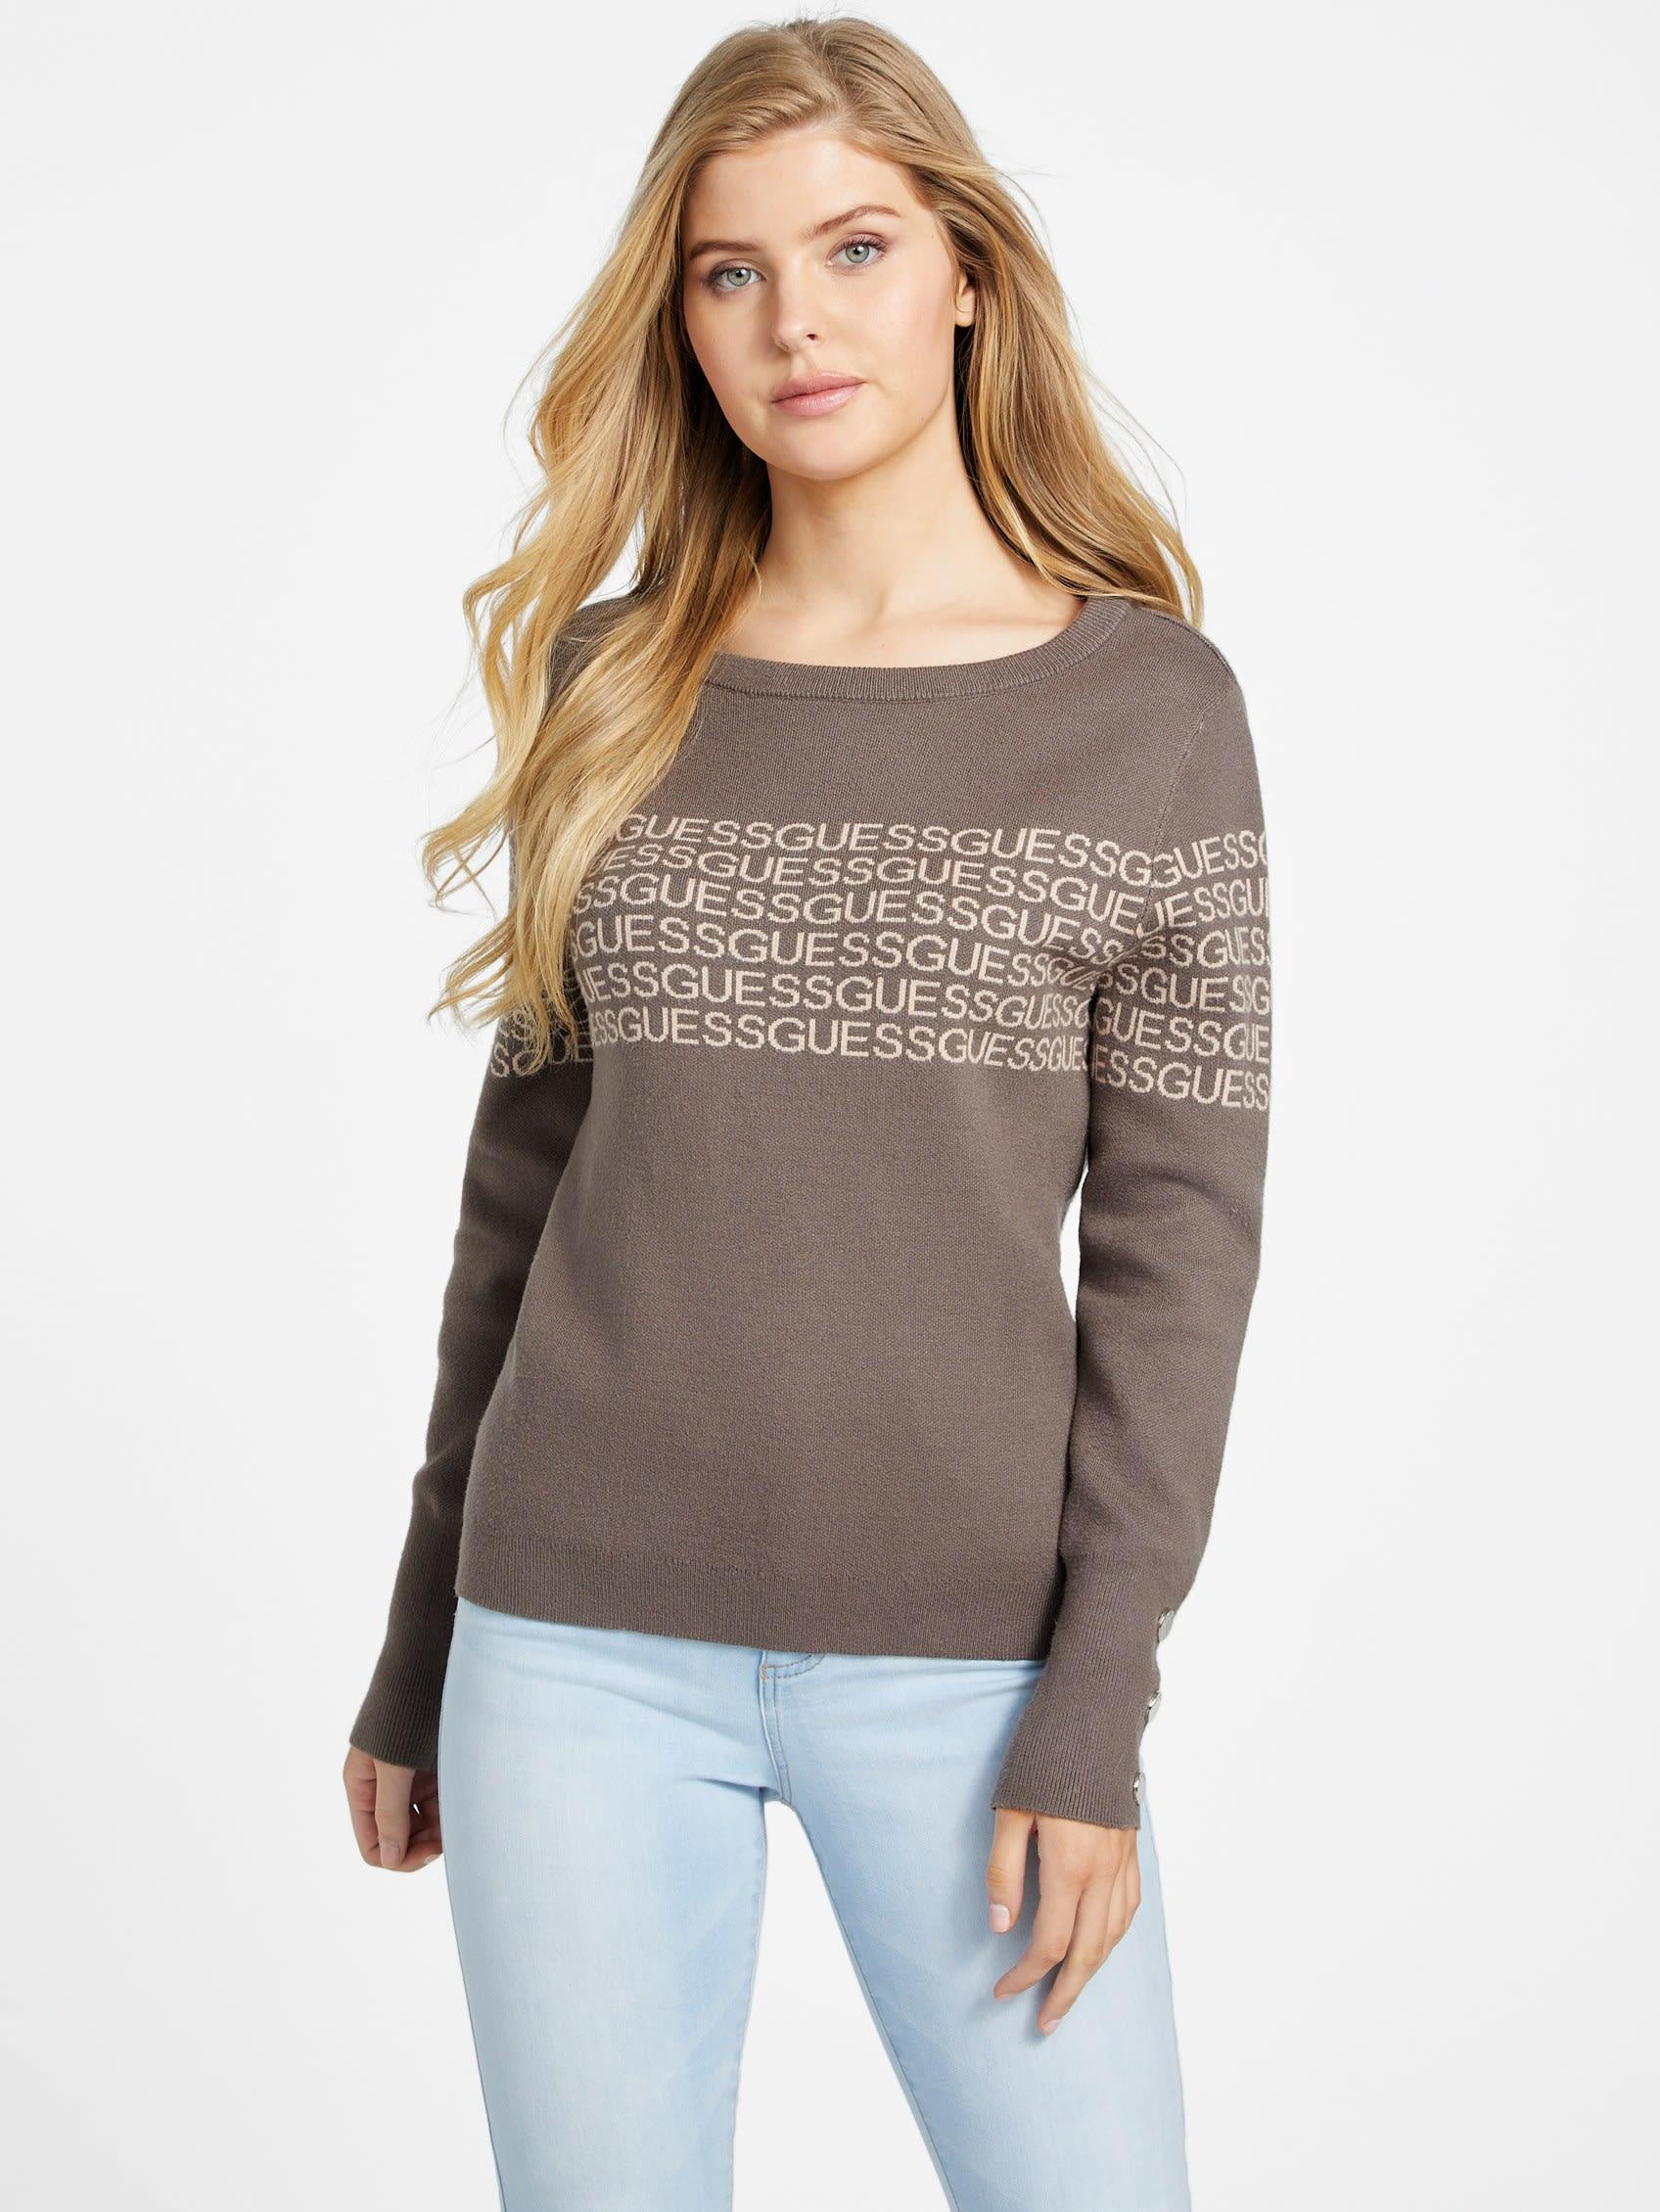 Guess Factory Mana Logo Sweater in Brown | Lyst